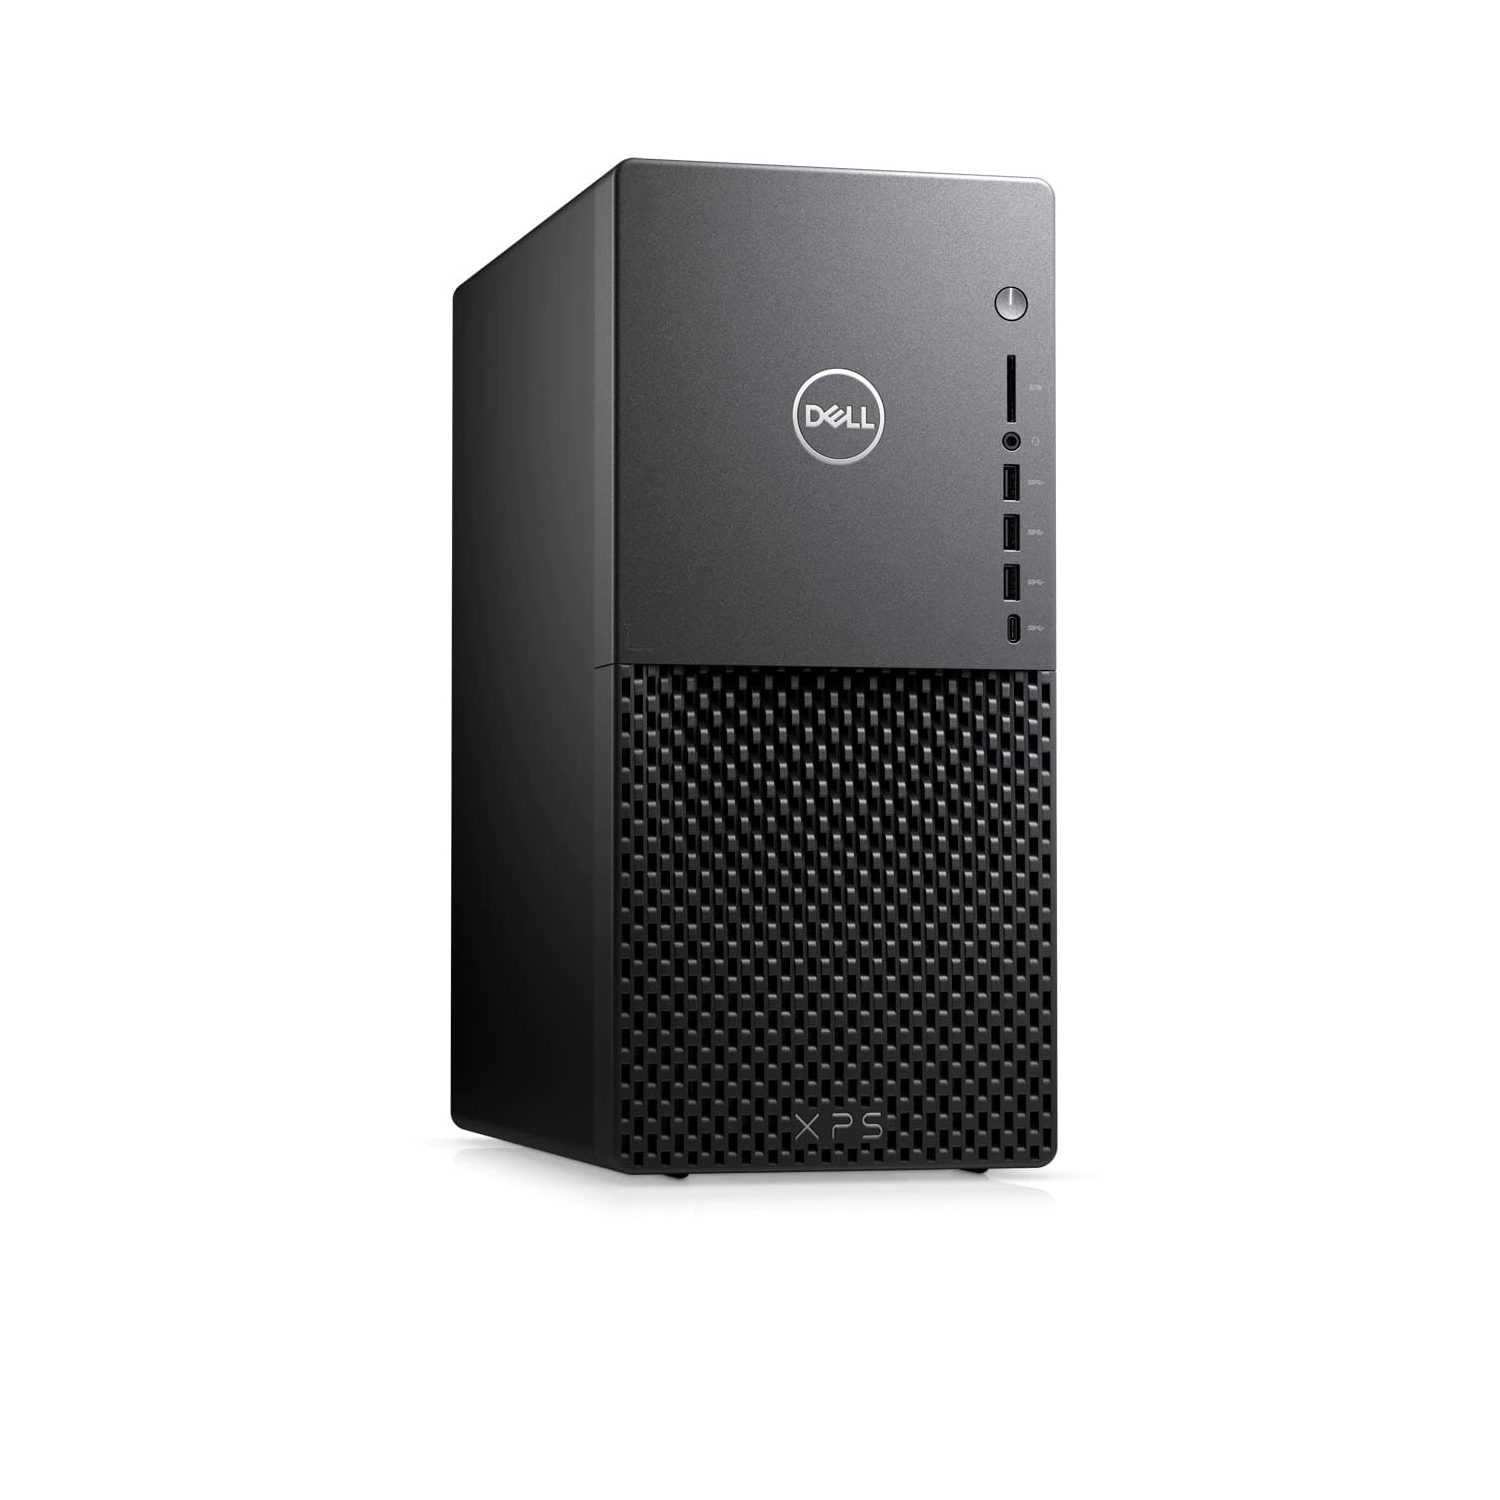 Refurbished (Excellent) - Dell XPS 8940 Desktop (2020) | Core i7 - 1TB HDD + 512GB SSD - 32GB RAM - RTX 3060 | 8 Cores @ 4.9 GHz - 11th Gen CPU Certified Refurbished